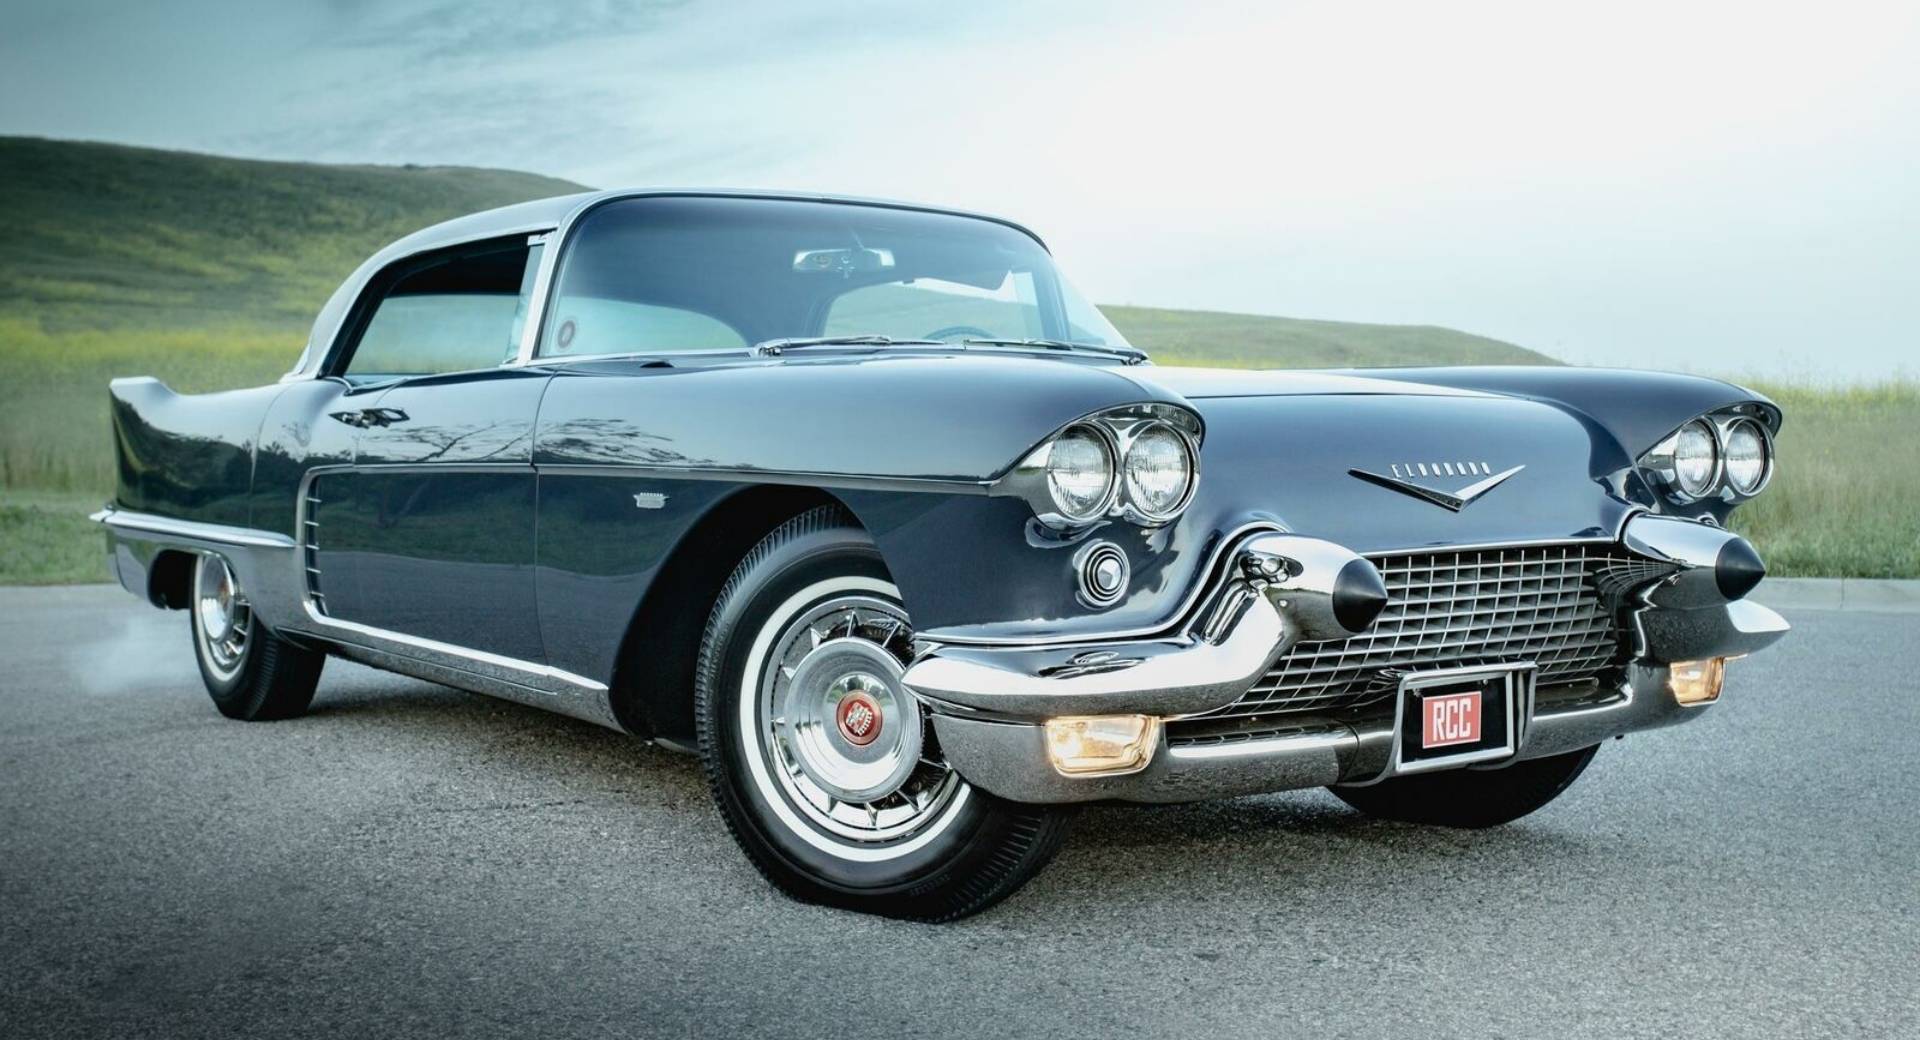 1958 Cadillac Eldorado Brougham Comes From A Time When Cars Were Art |  Carscoops